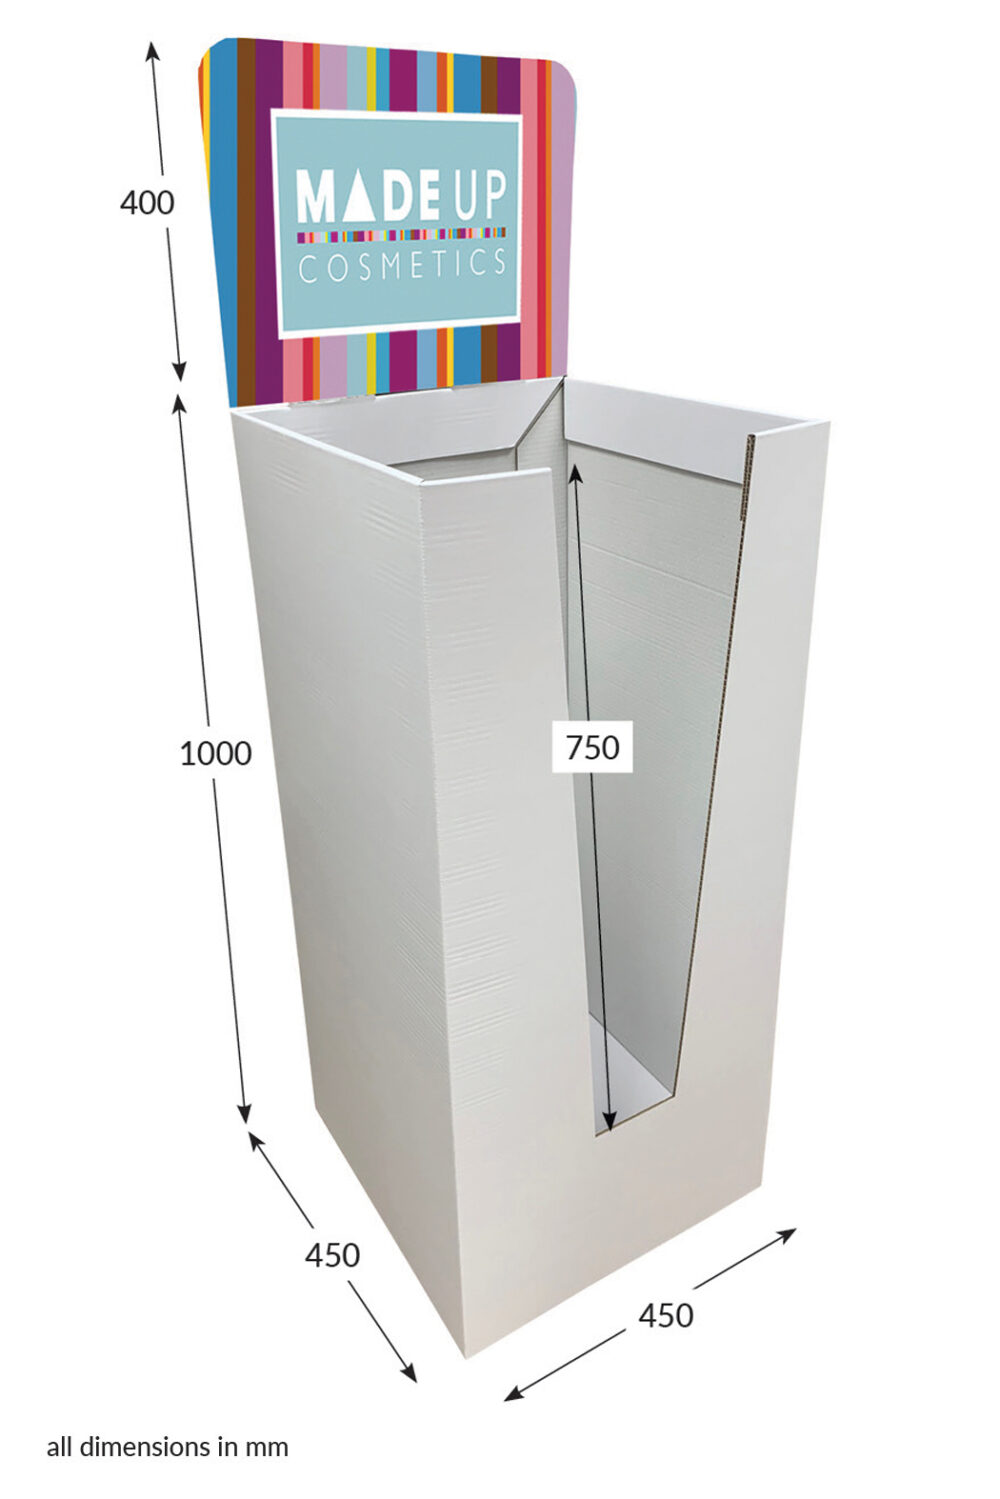 Featured image for “Square Dump Bin with Header & Cutout - Header Printed”